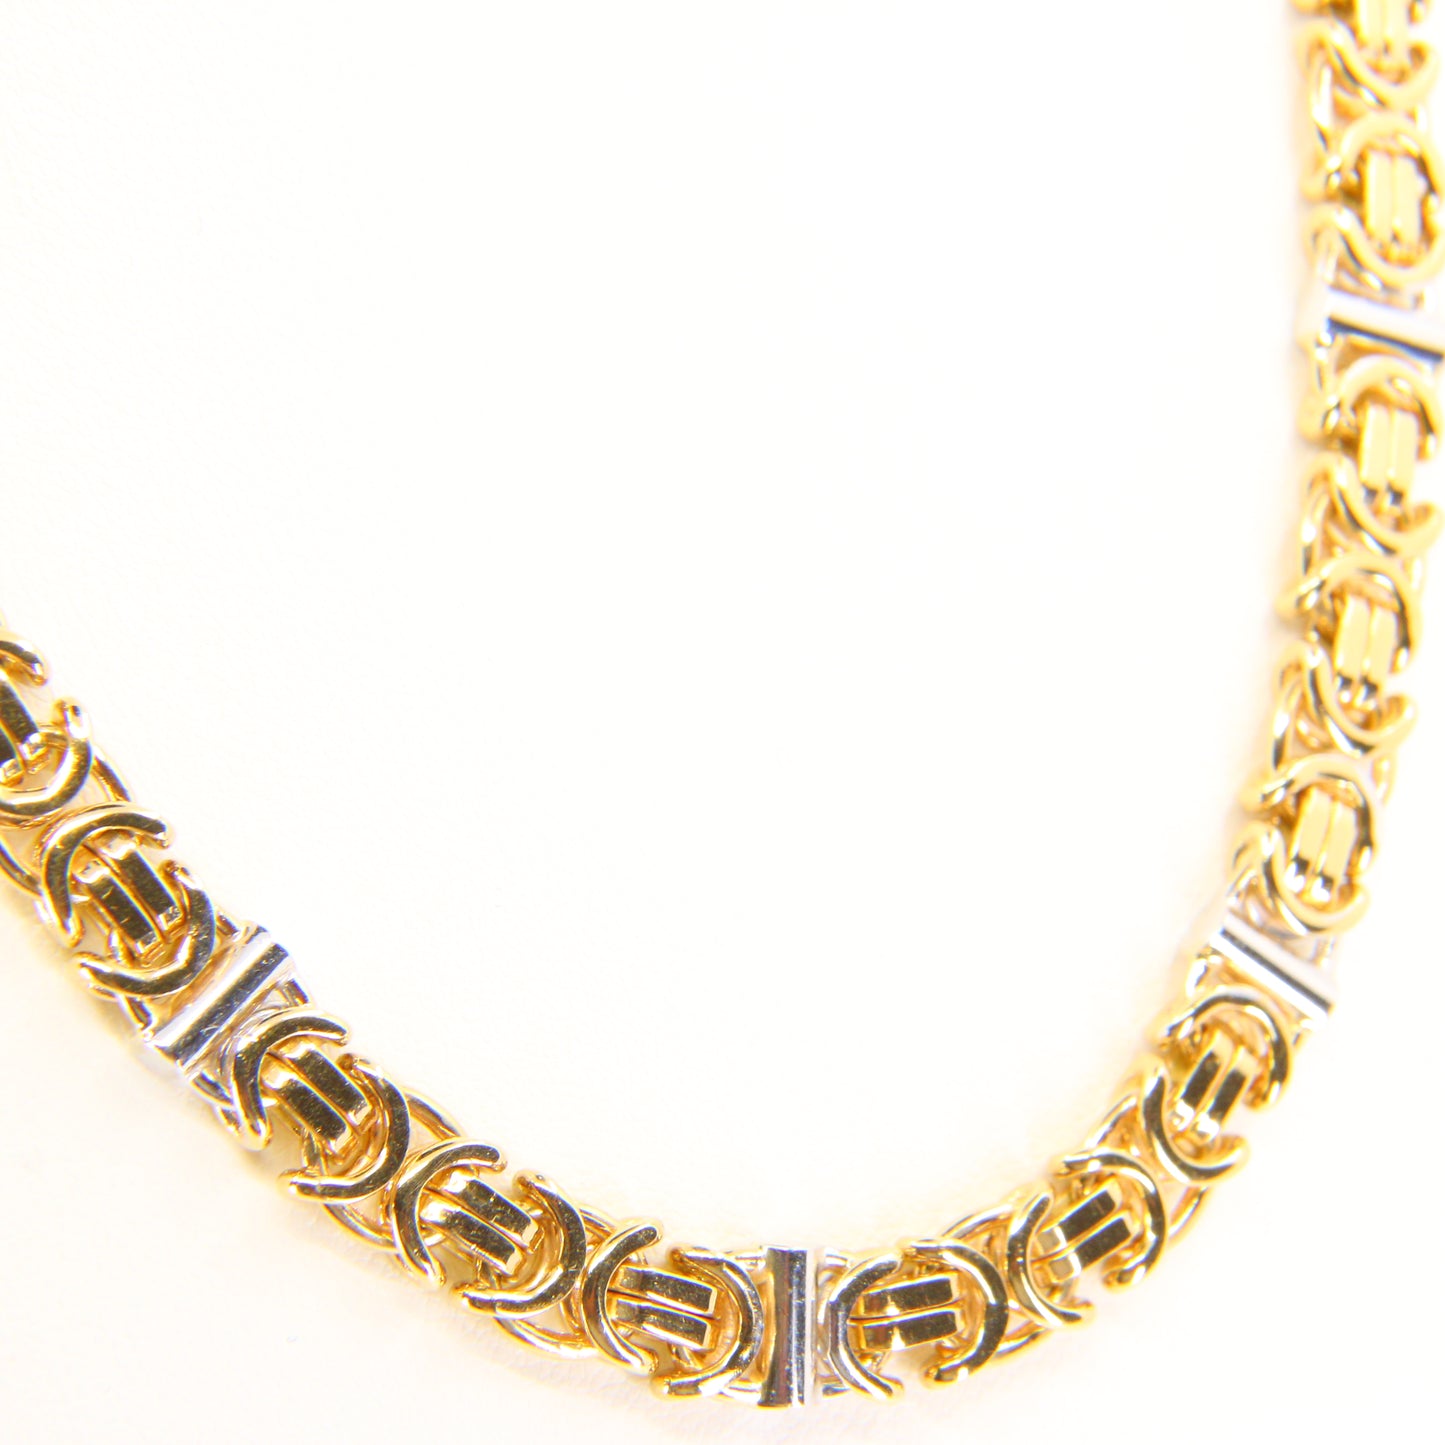 Vintage 9ct Heavy Flat Chain Necklace Yellow Gold British Hallmarked Boxed Gift